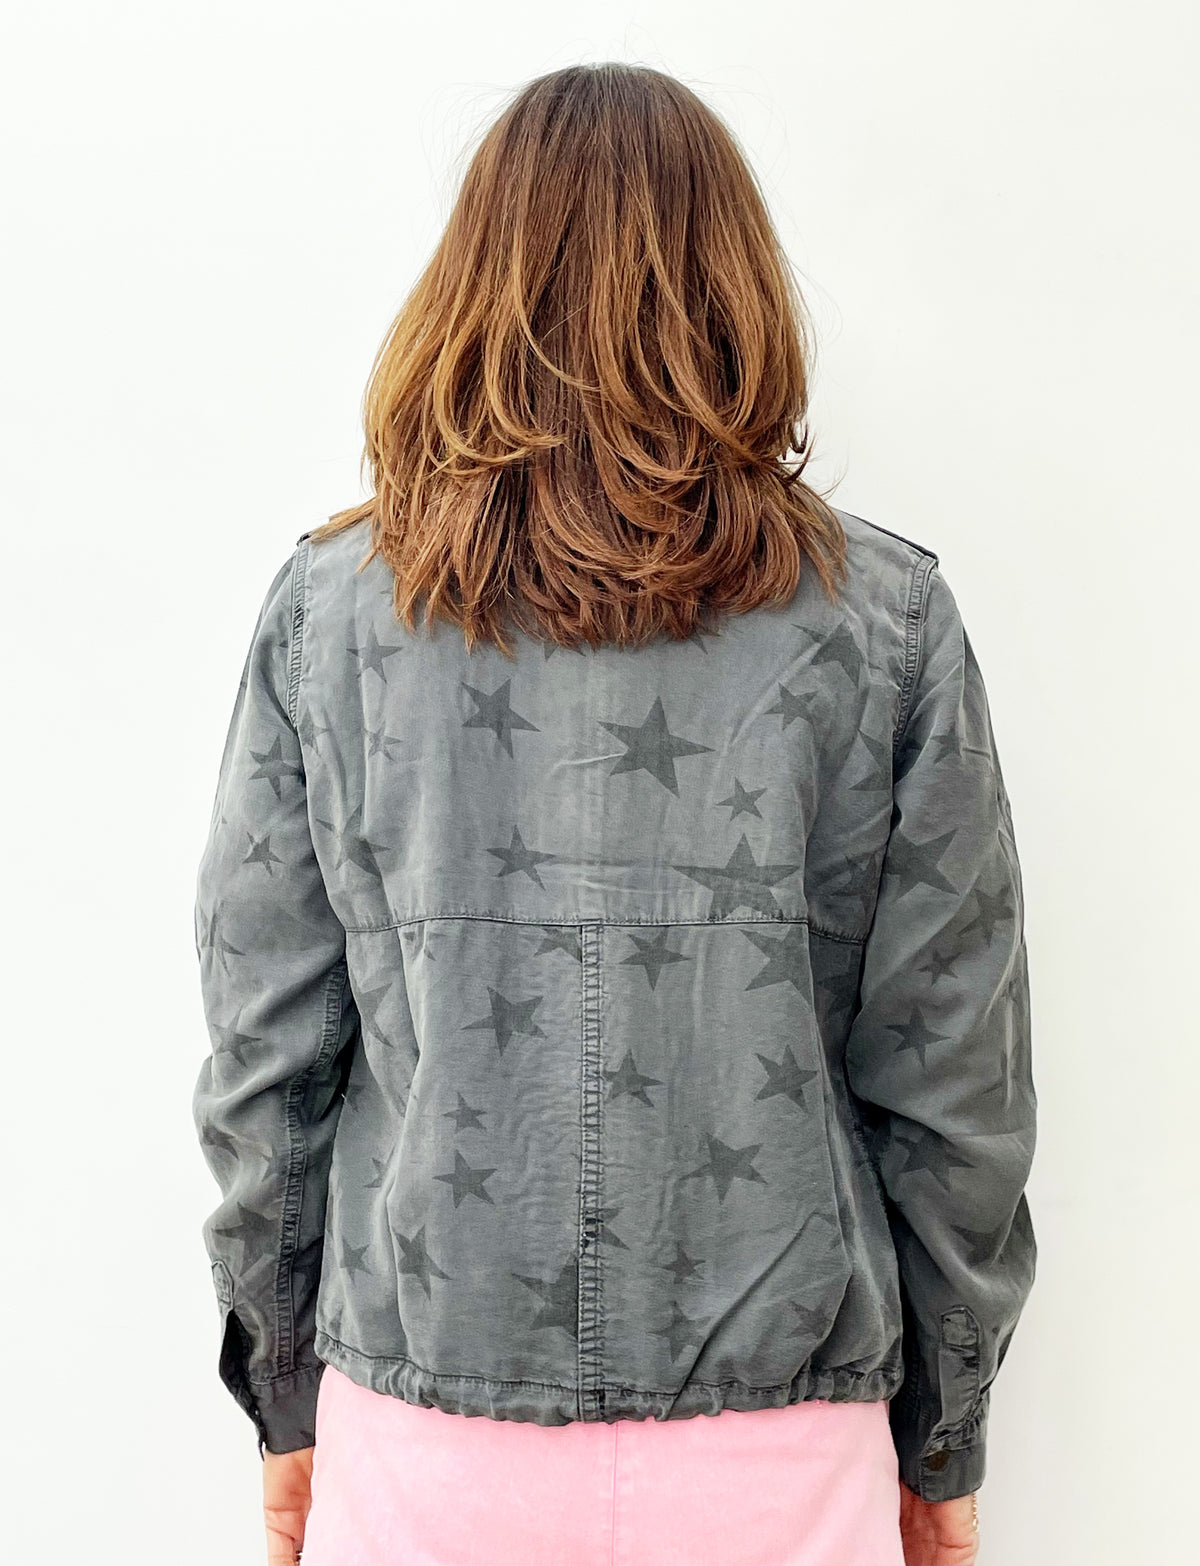 FIVE Bella Jacket with Stars in Carbon